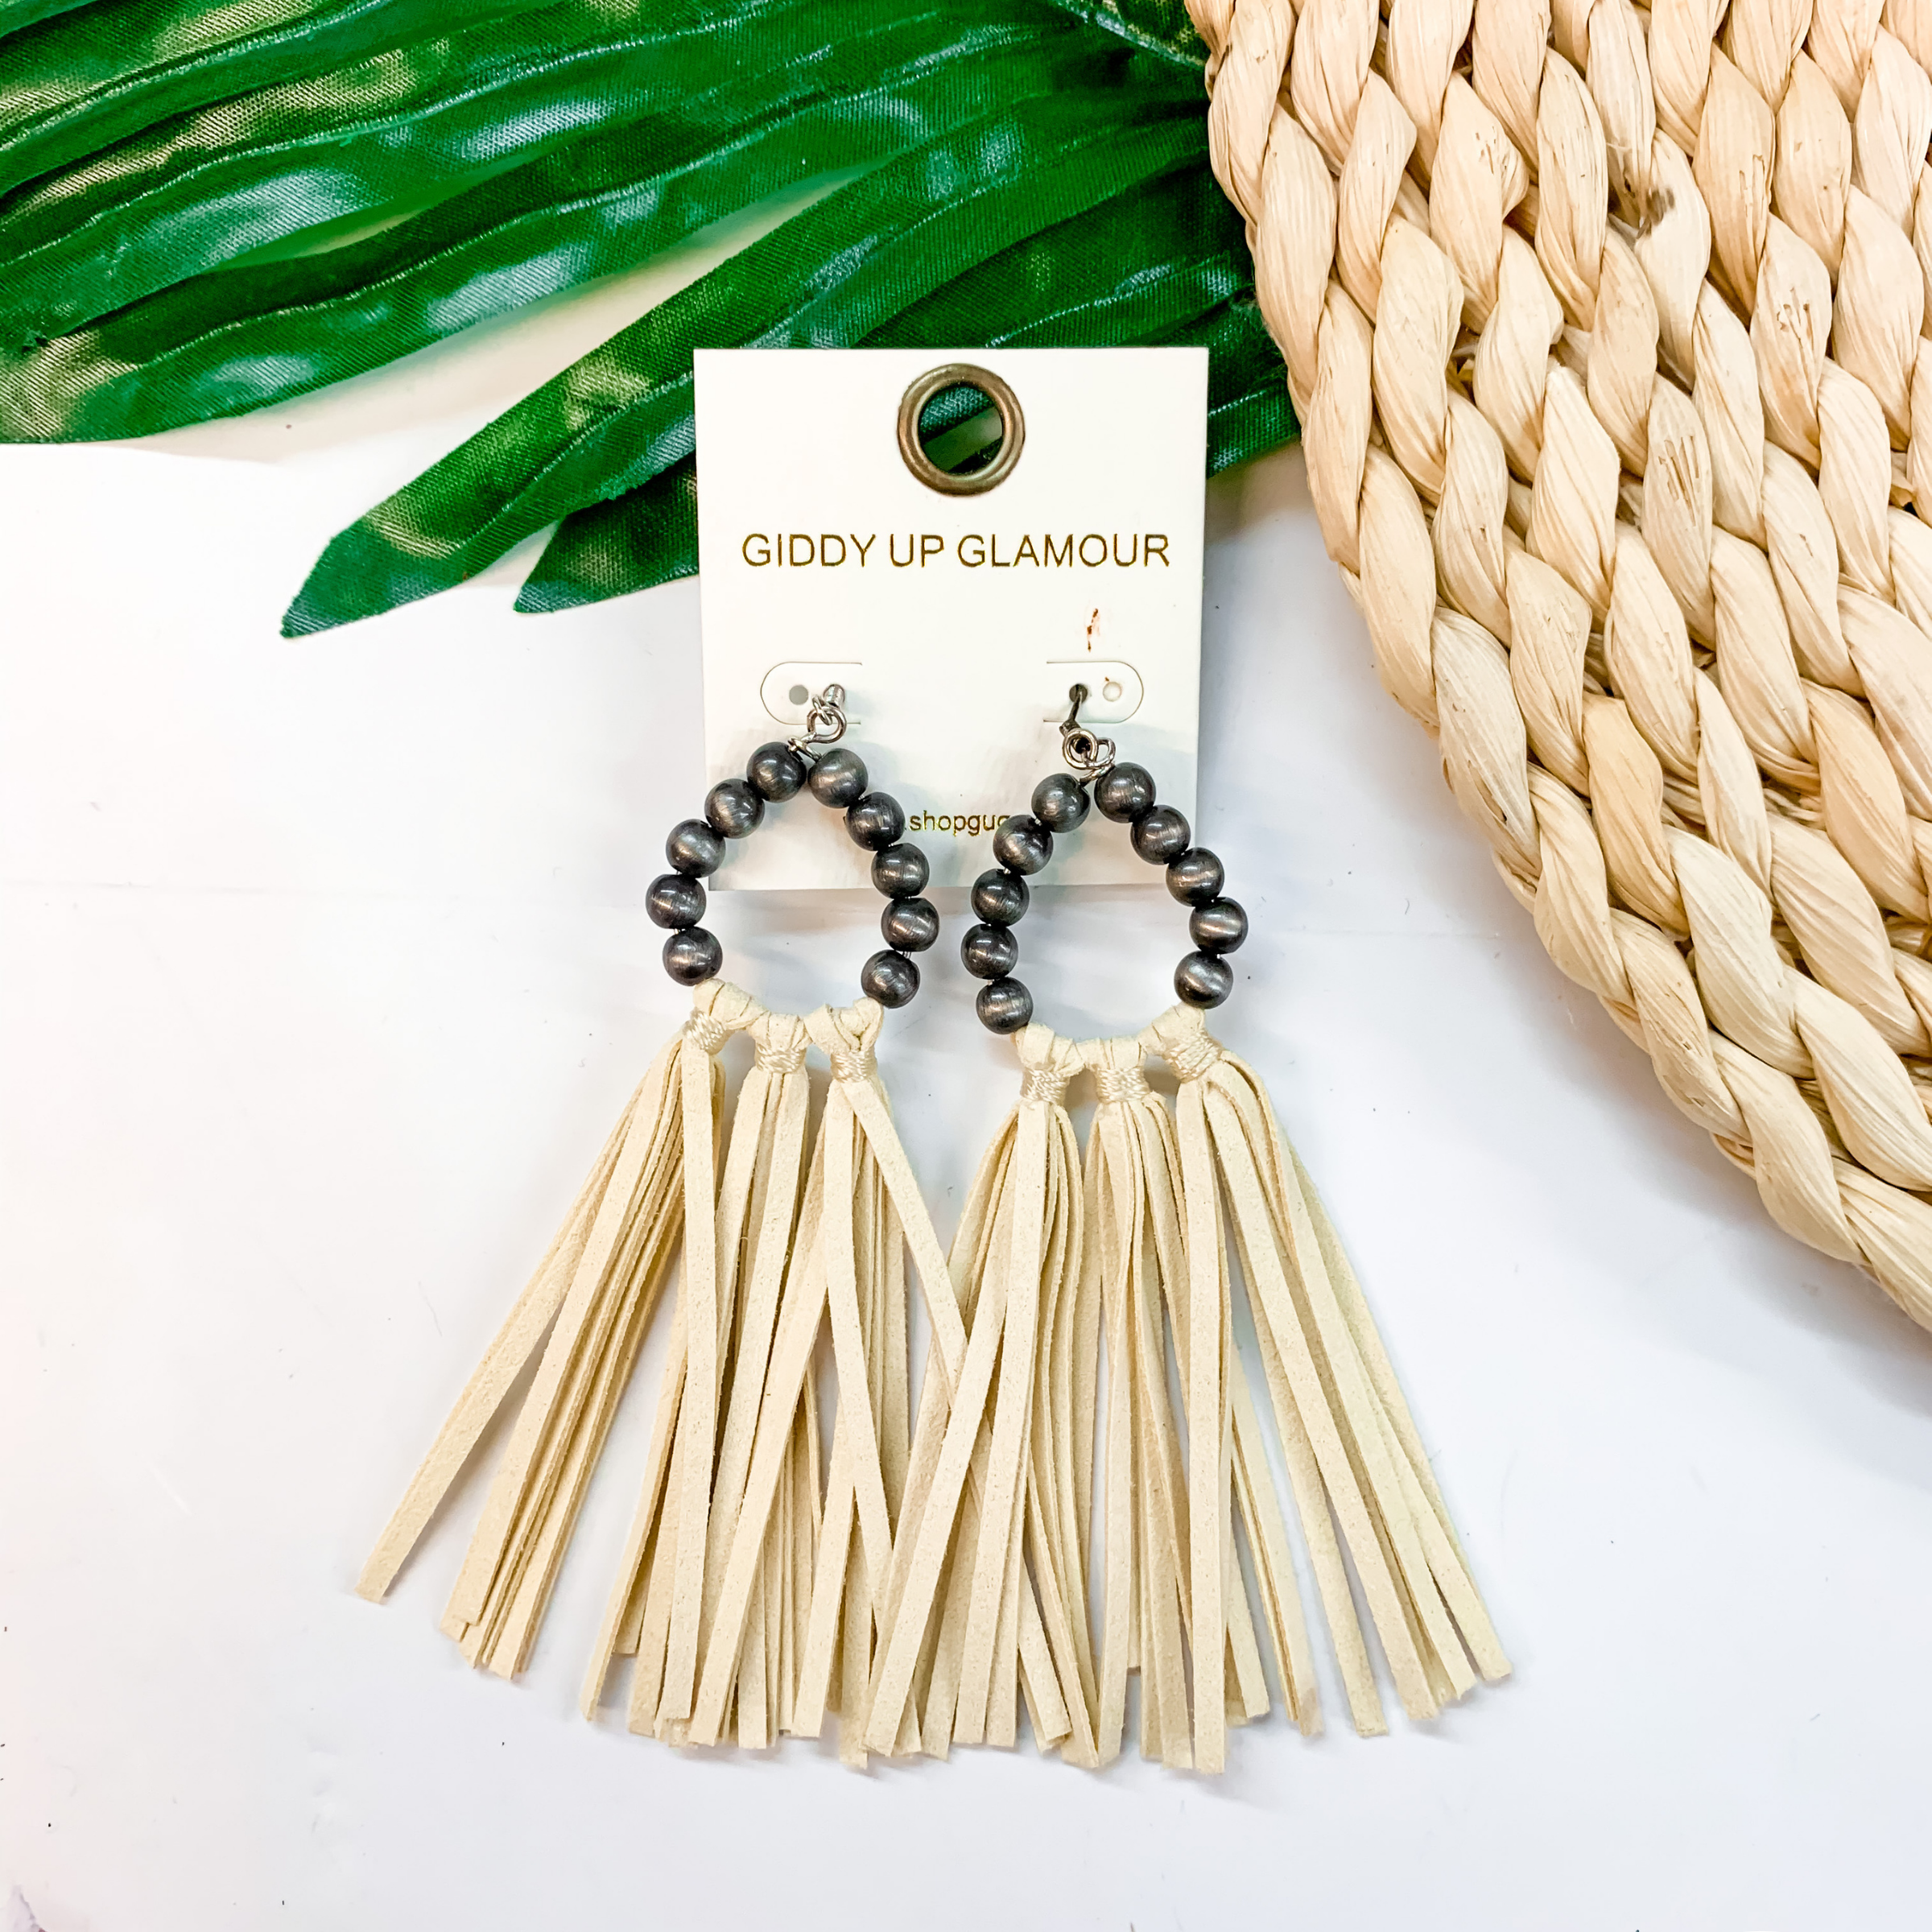 Faux Navajo pearl earrings with ivory tassels. These earrings are pictured on a white background with a basket and a green palm leaf.